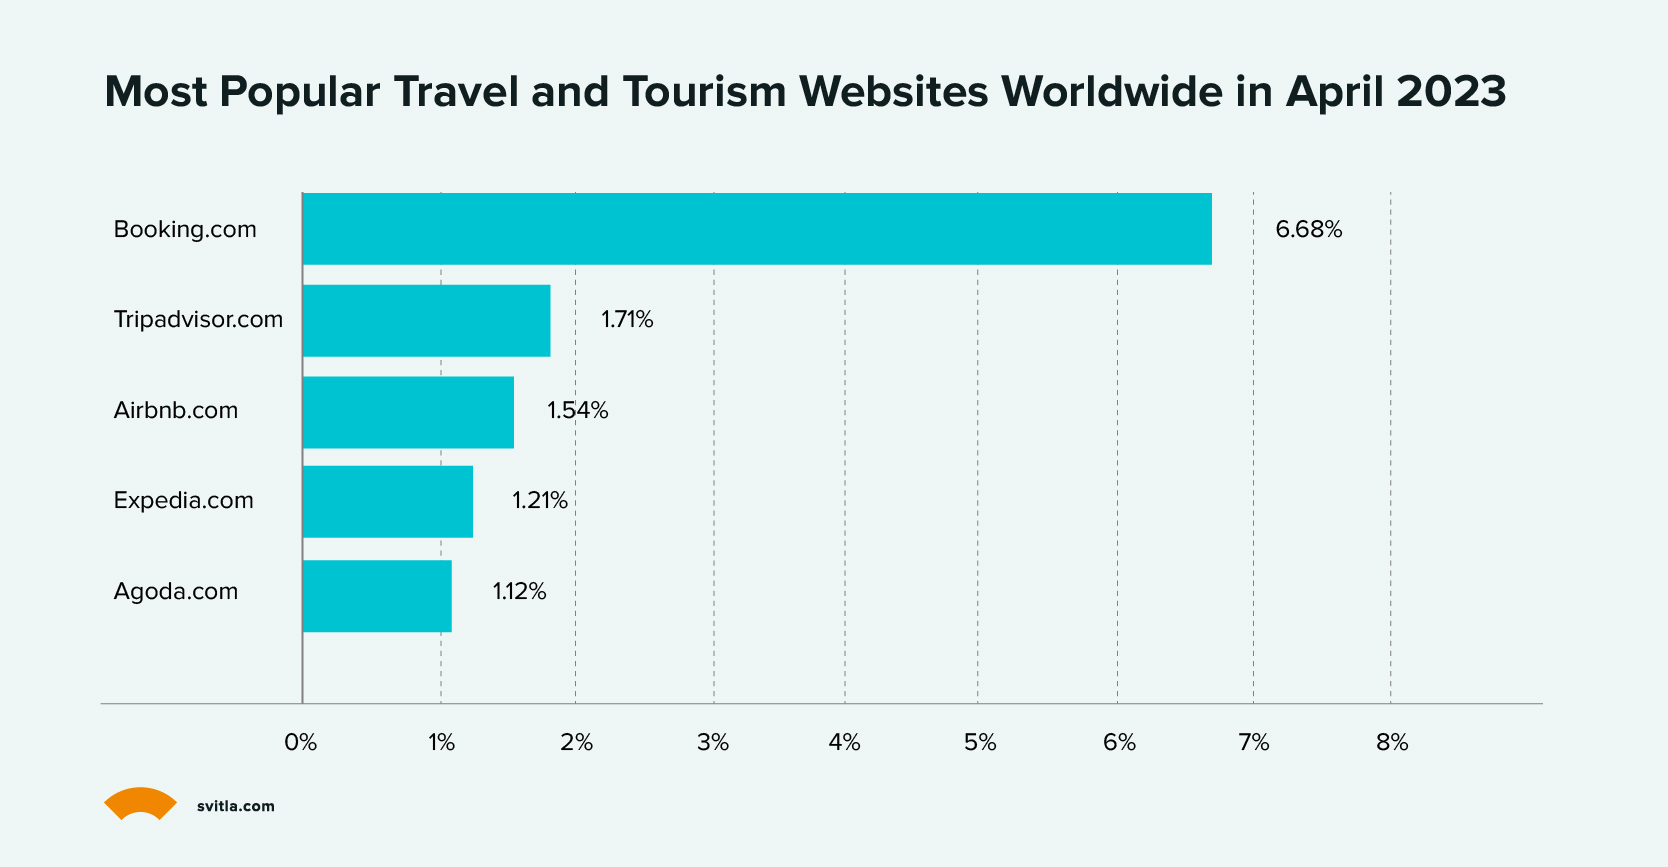 Most Popular Travel and Tourism Websites Worldwide in April 2023